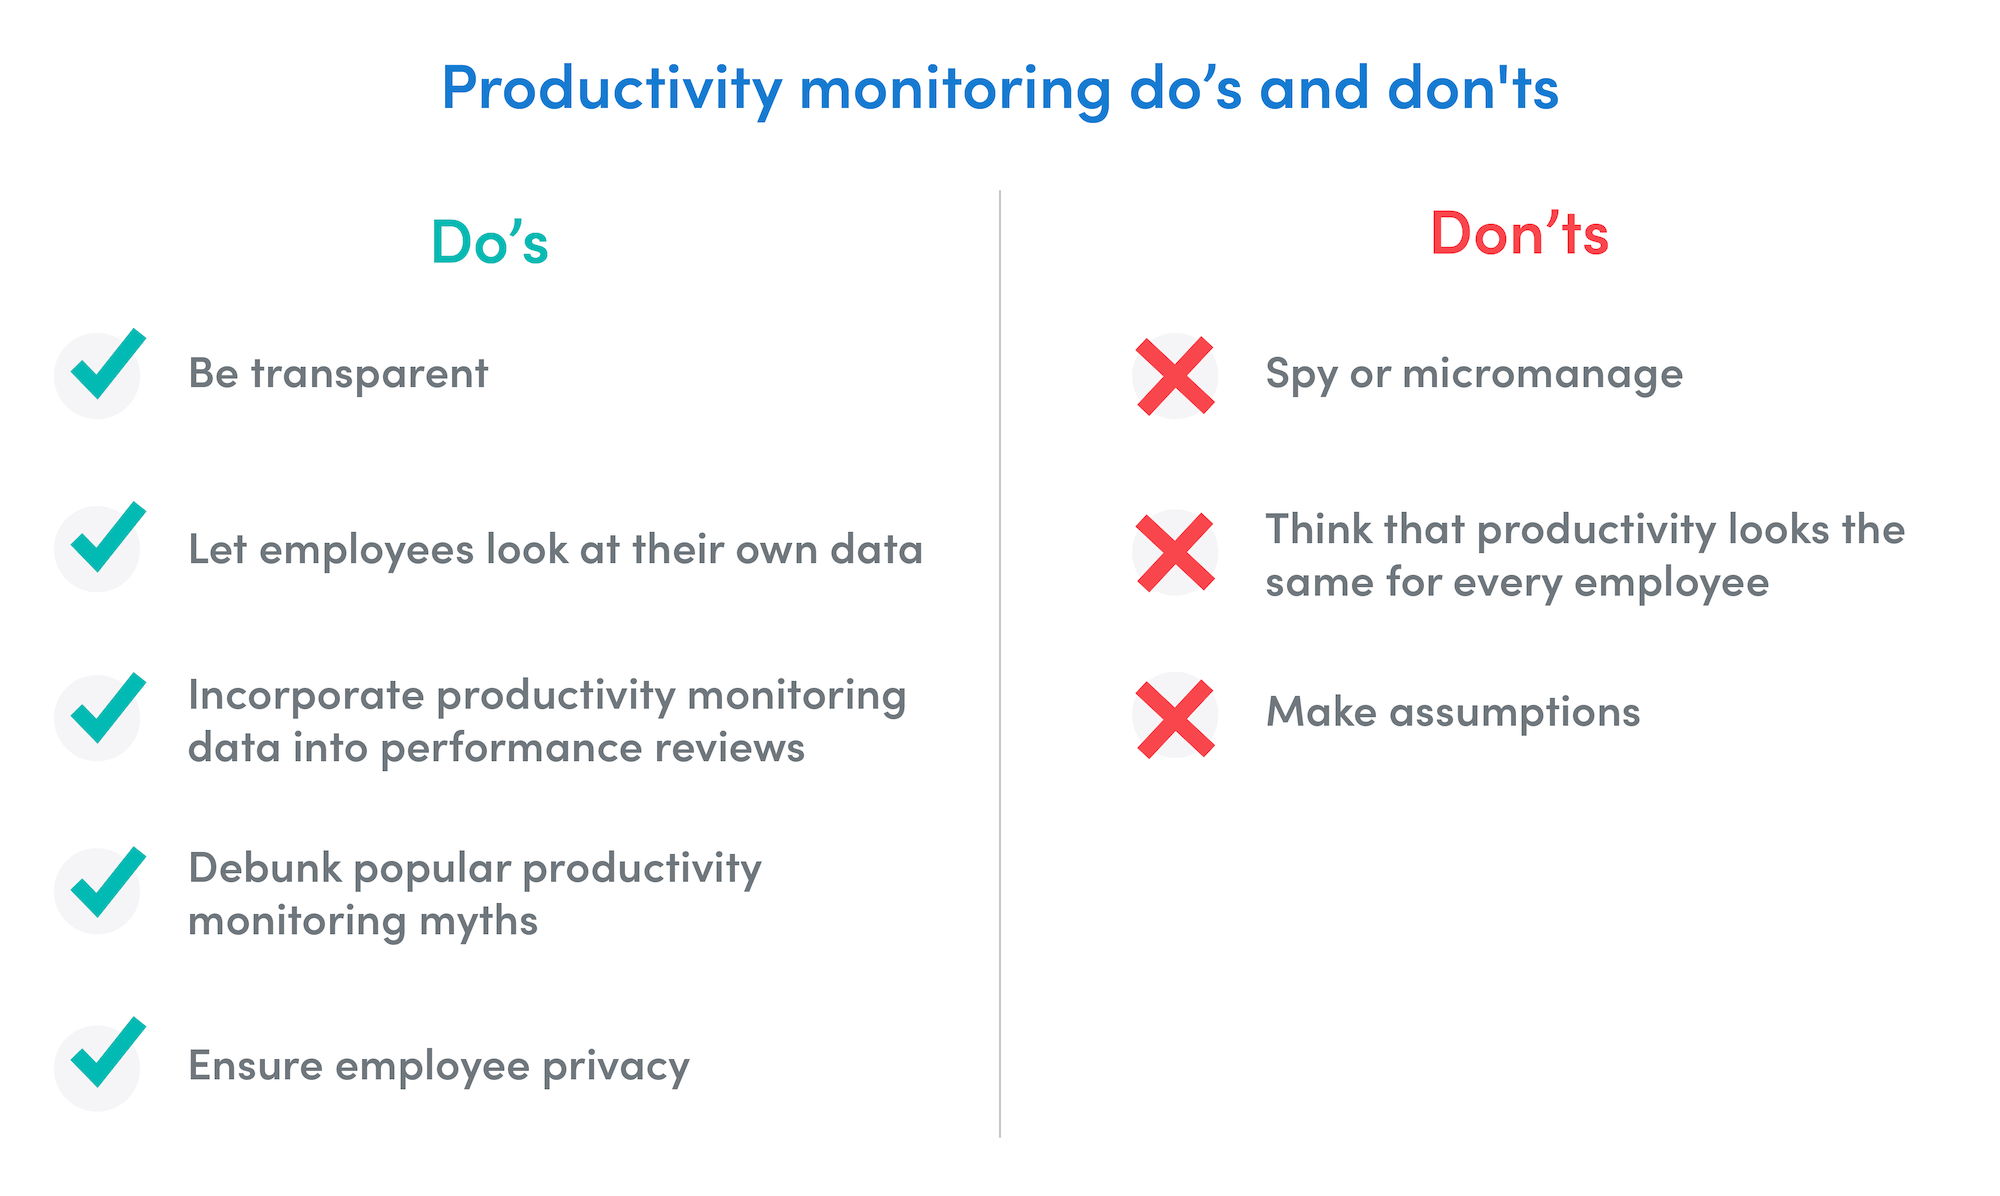 The do's and dont's of productivity monitoring